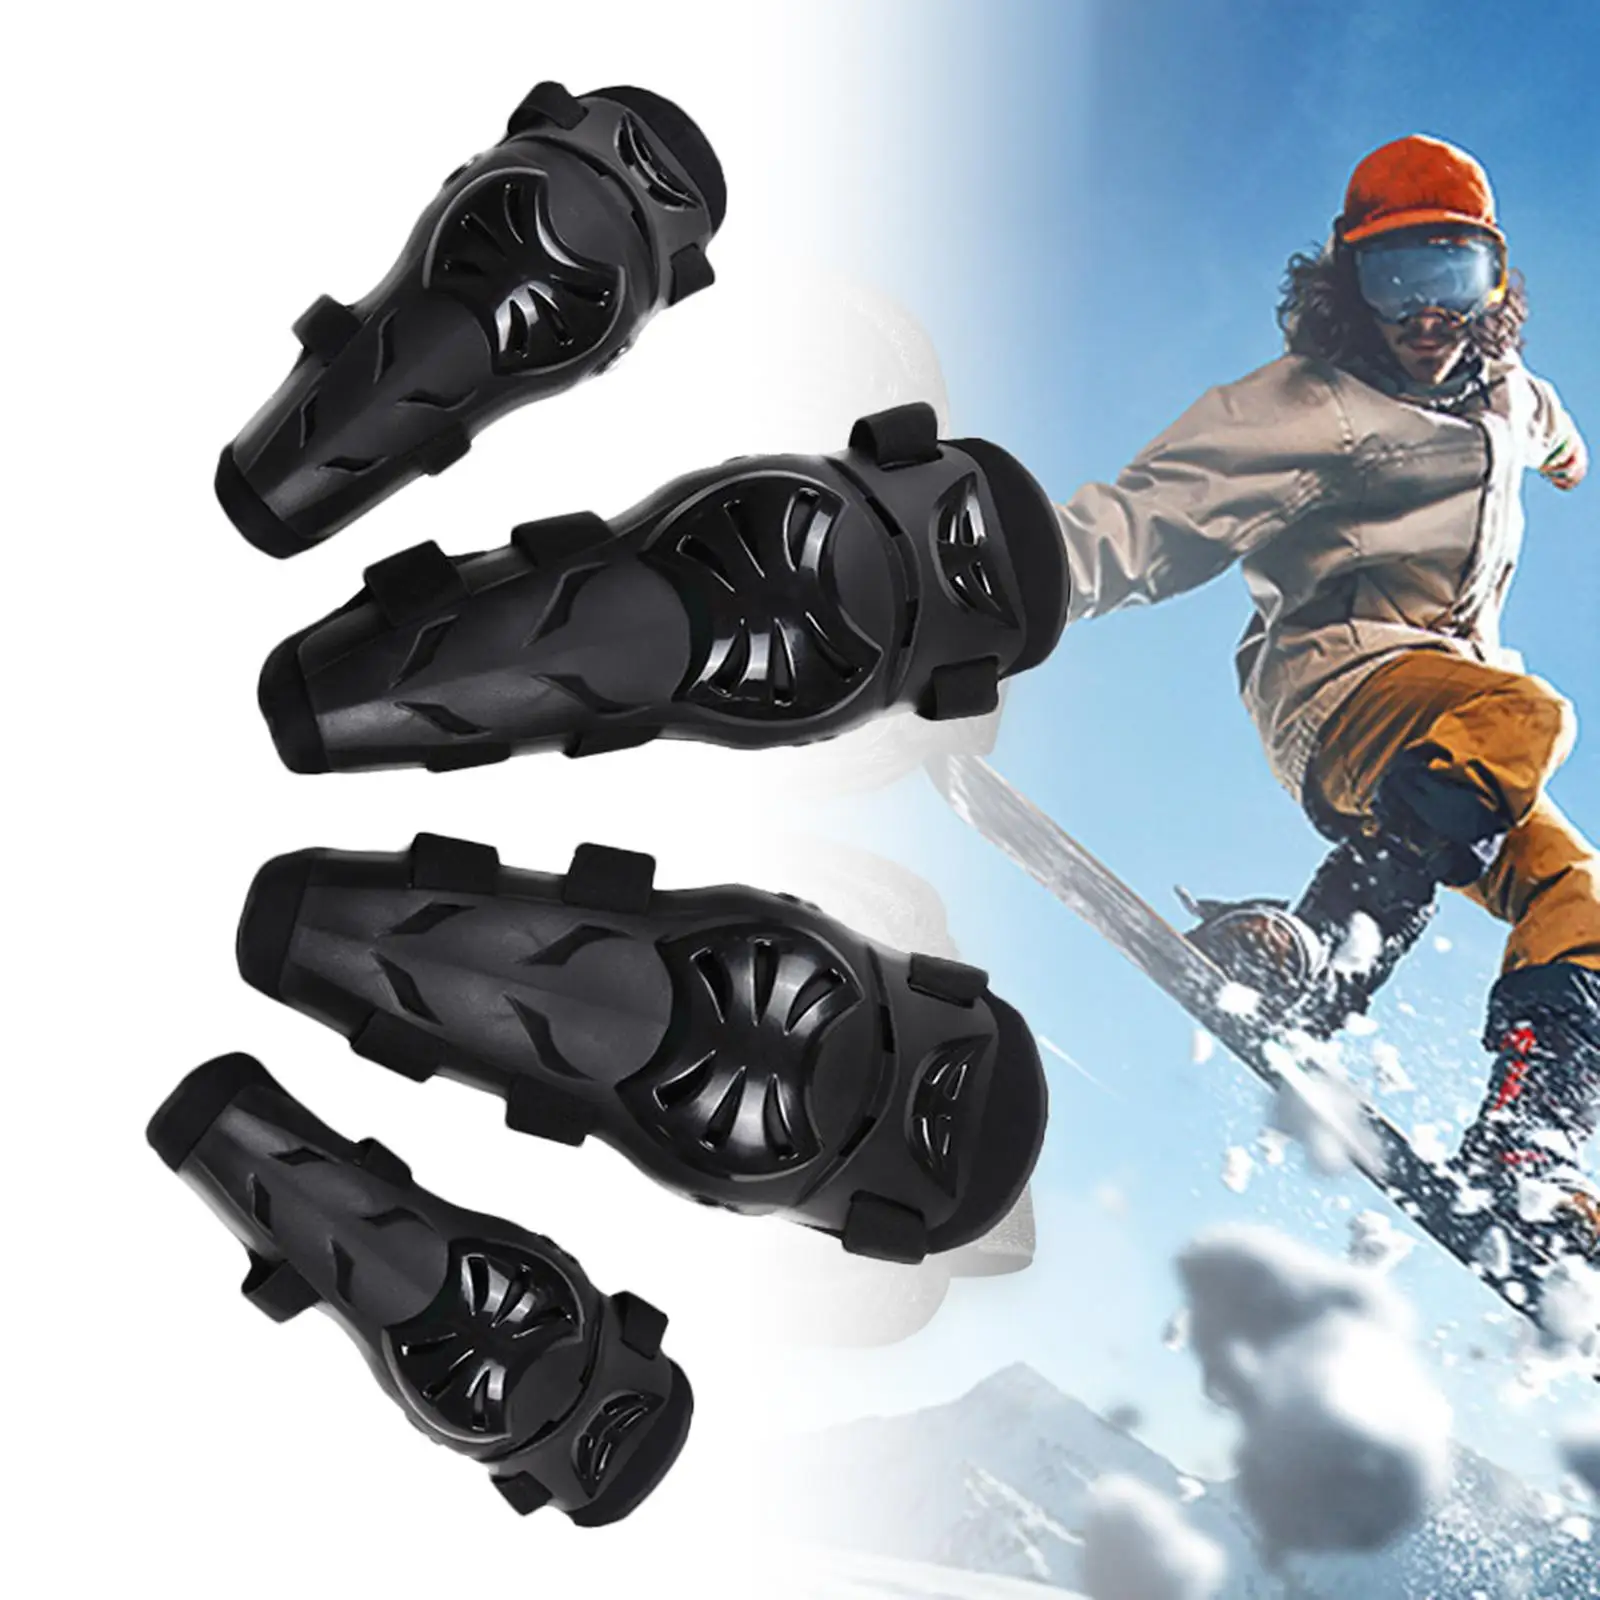 4 Pieces Motorcycle Knee Shin Guards Cusion for Skating Motocross Sport